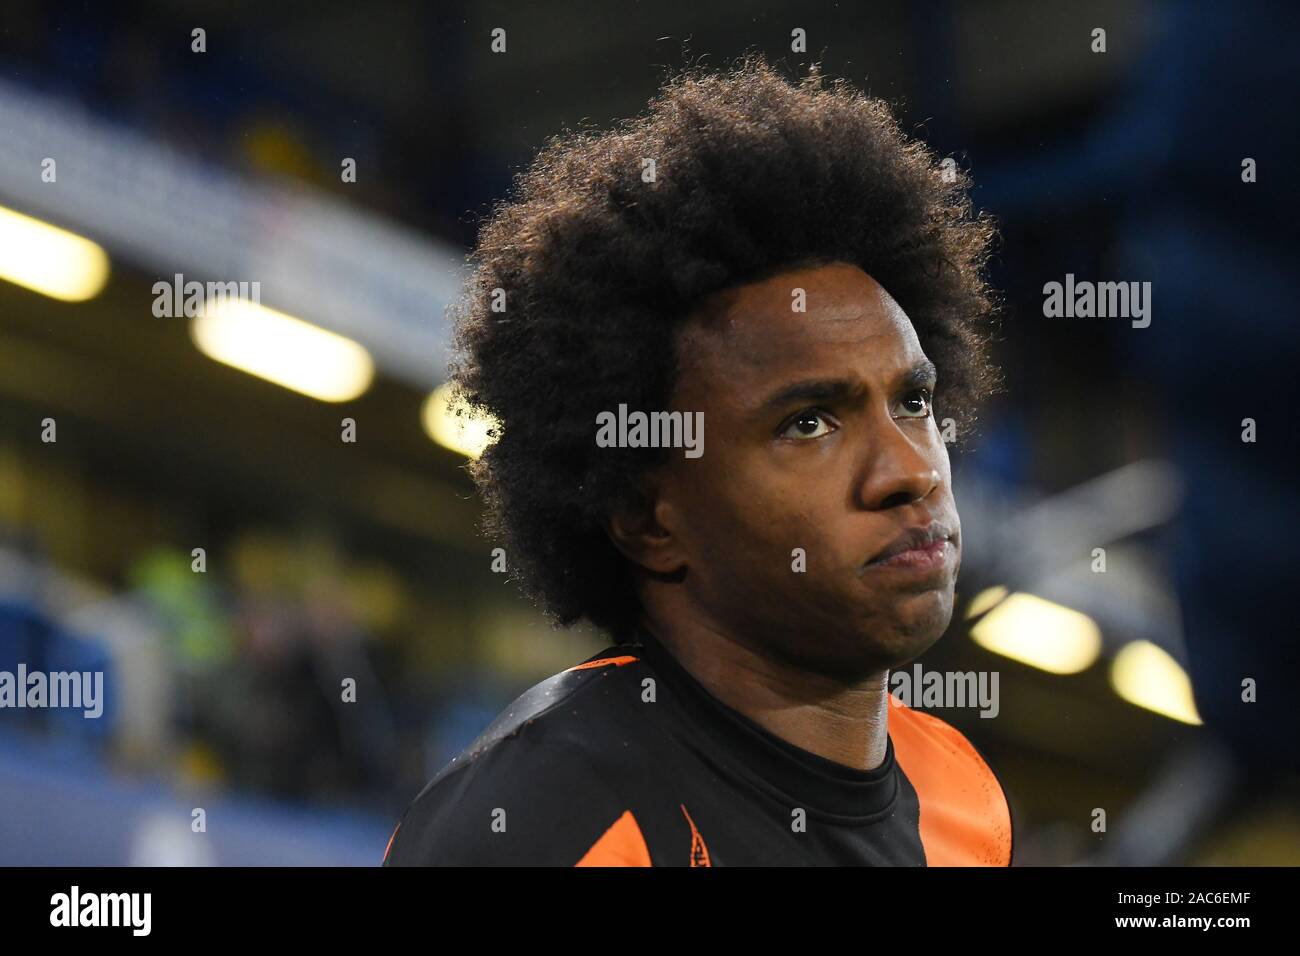 LONDON, ENGLAND - NOVEMBER 5, 2019: Willian Borges da Silva of Chelsea pictured prior to the 2019/20 UEFA Champions League Group H game between Chelsea FC (England) and AFC Ajax (Netherlands) at Stamford Bridge. Stock Photo